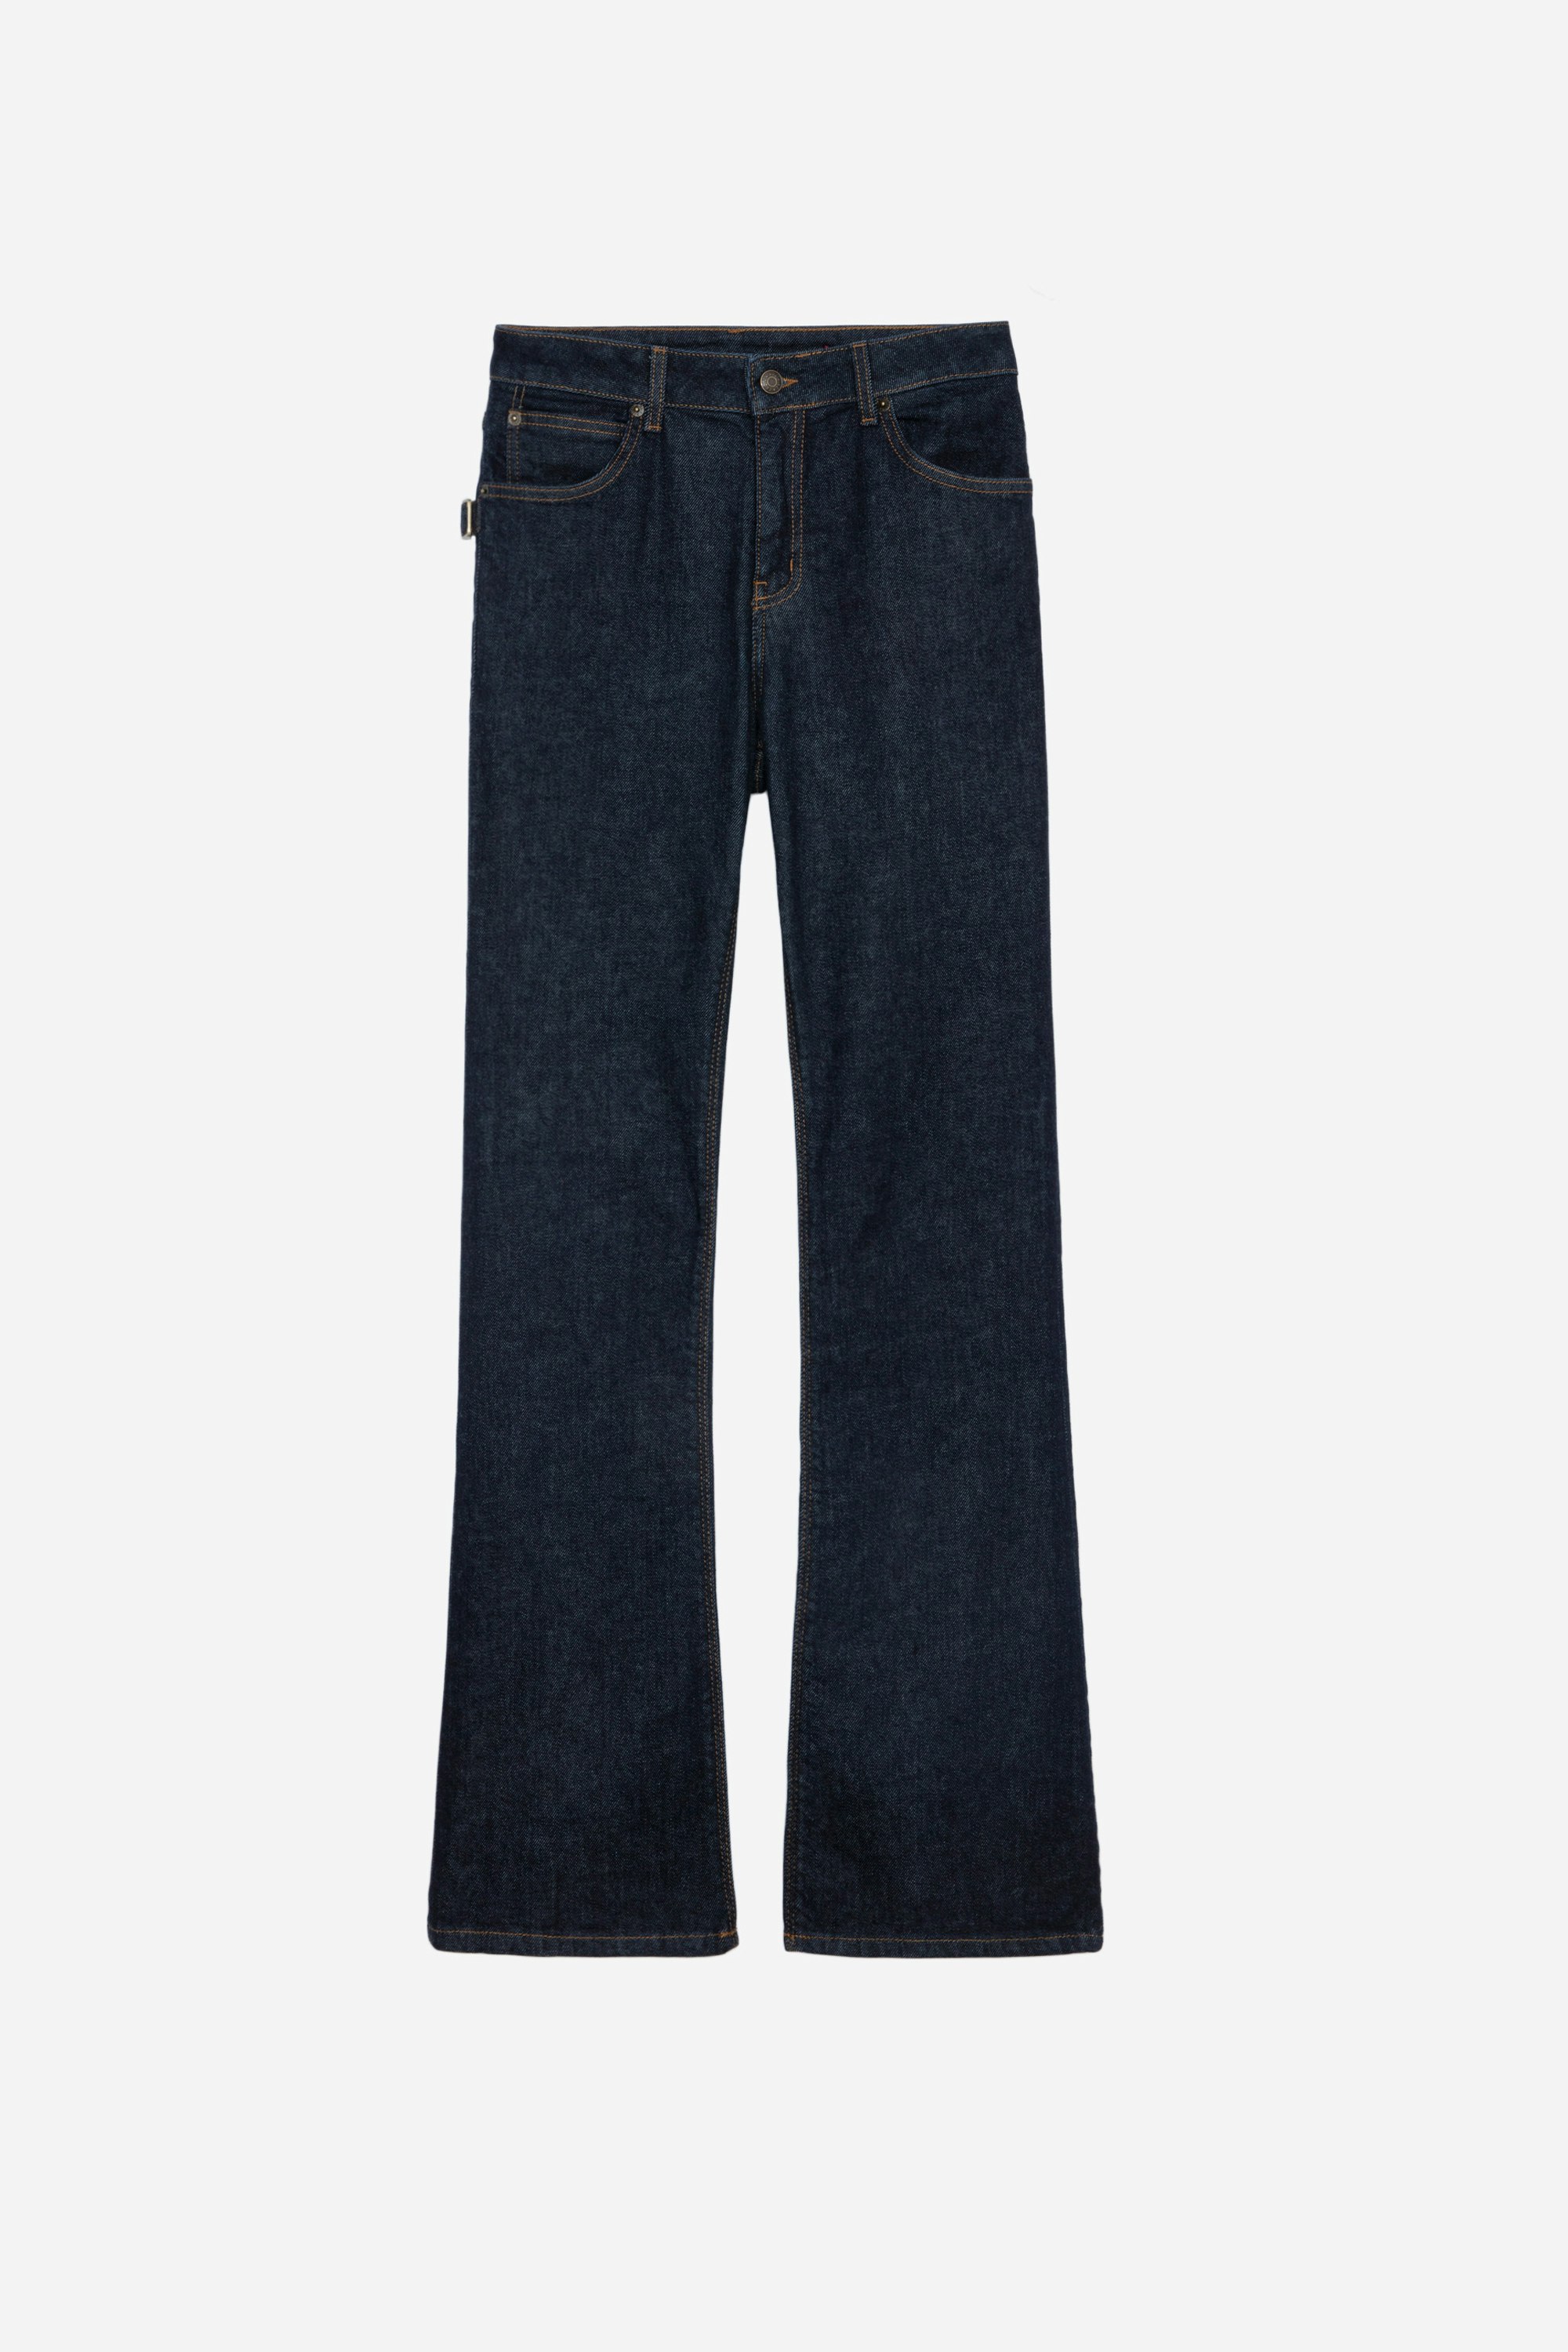 Emile Jeans Women's wide denim jeans with "Emile" embroidery.